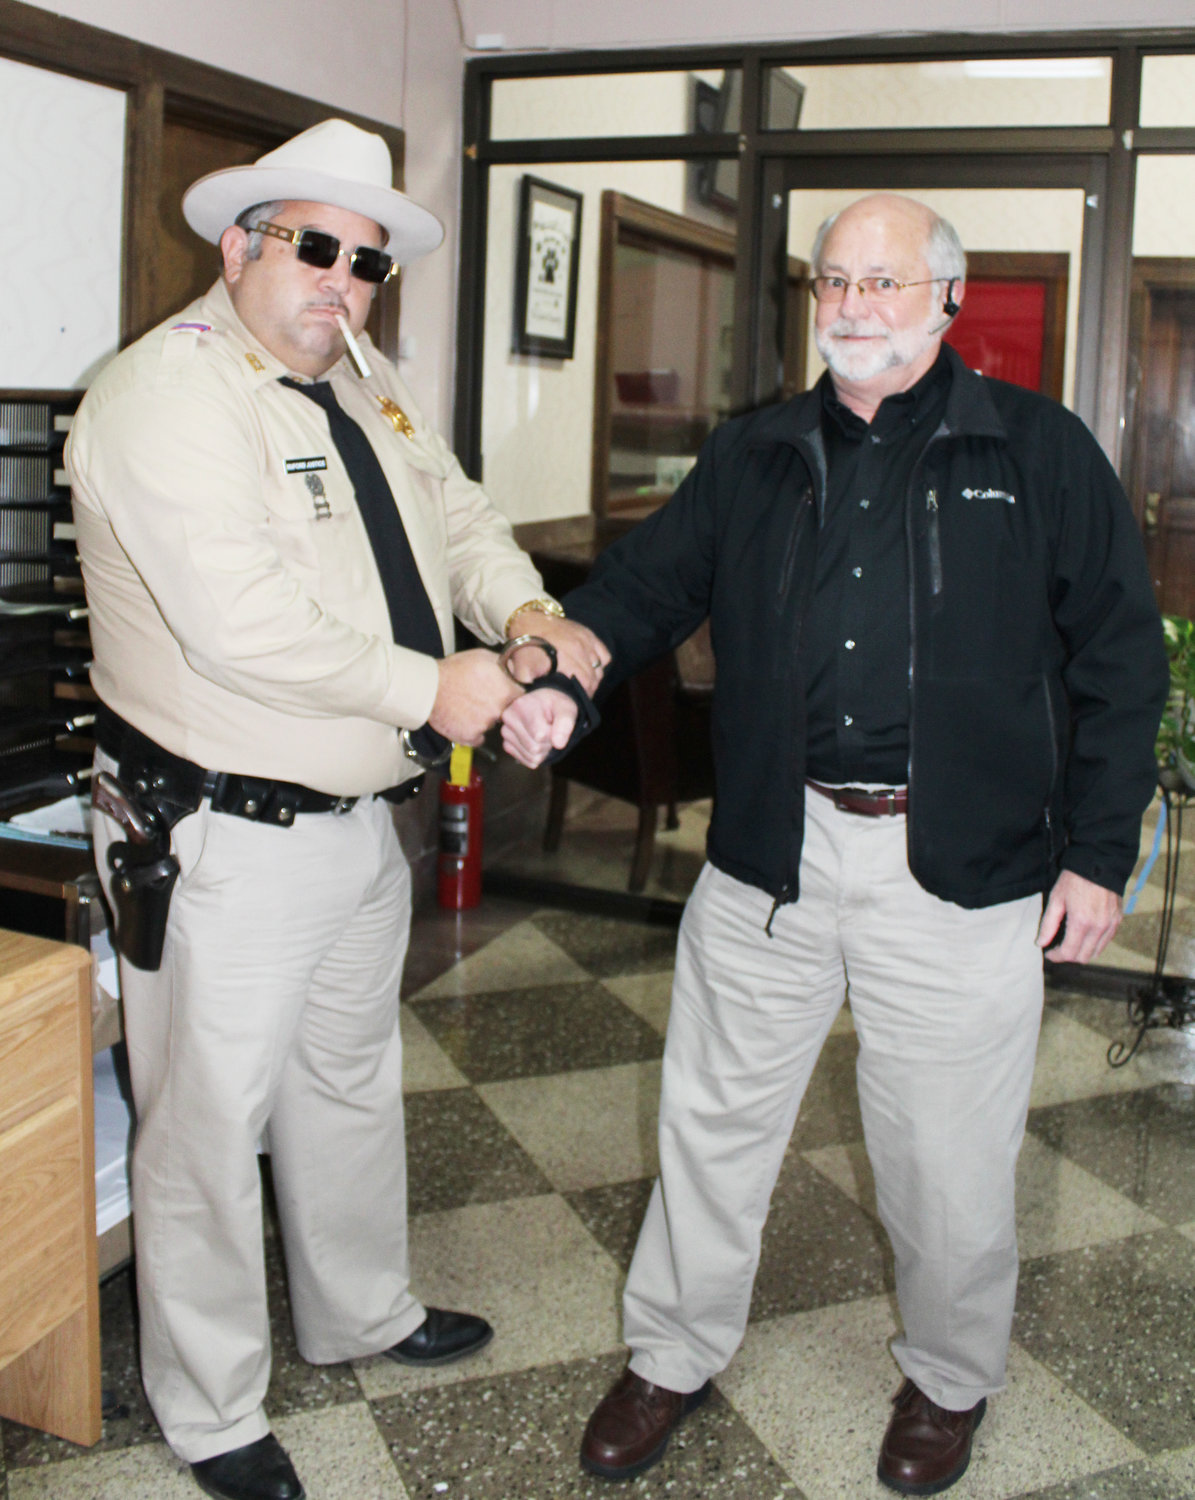 Buford T. Justice (Matt Cutter) “arrests” Chamber president Marvin Bullock for violating the “Code of Justice.”